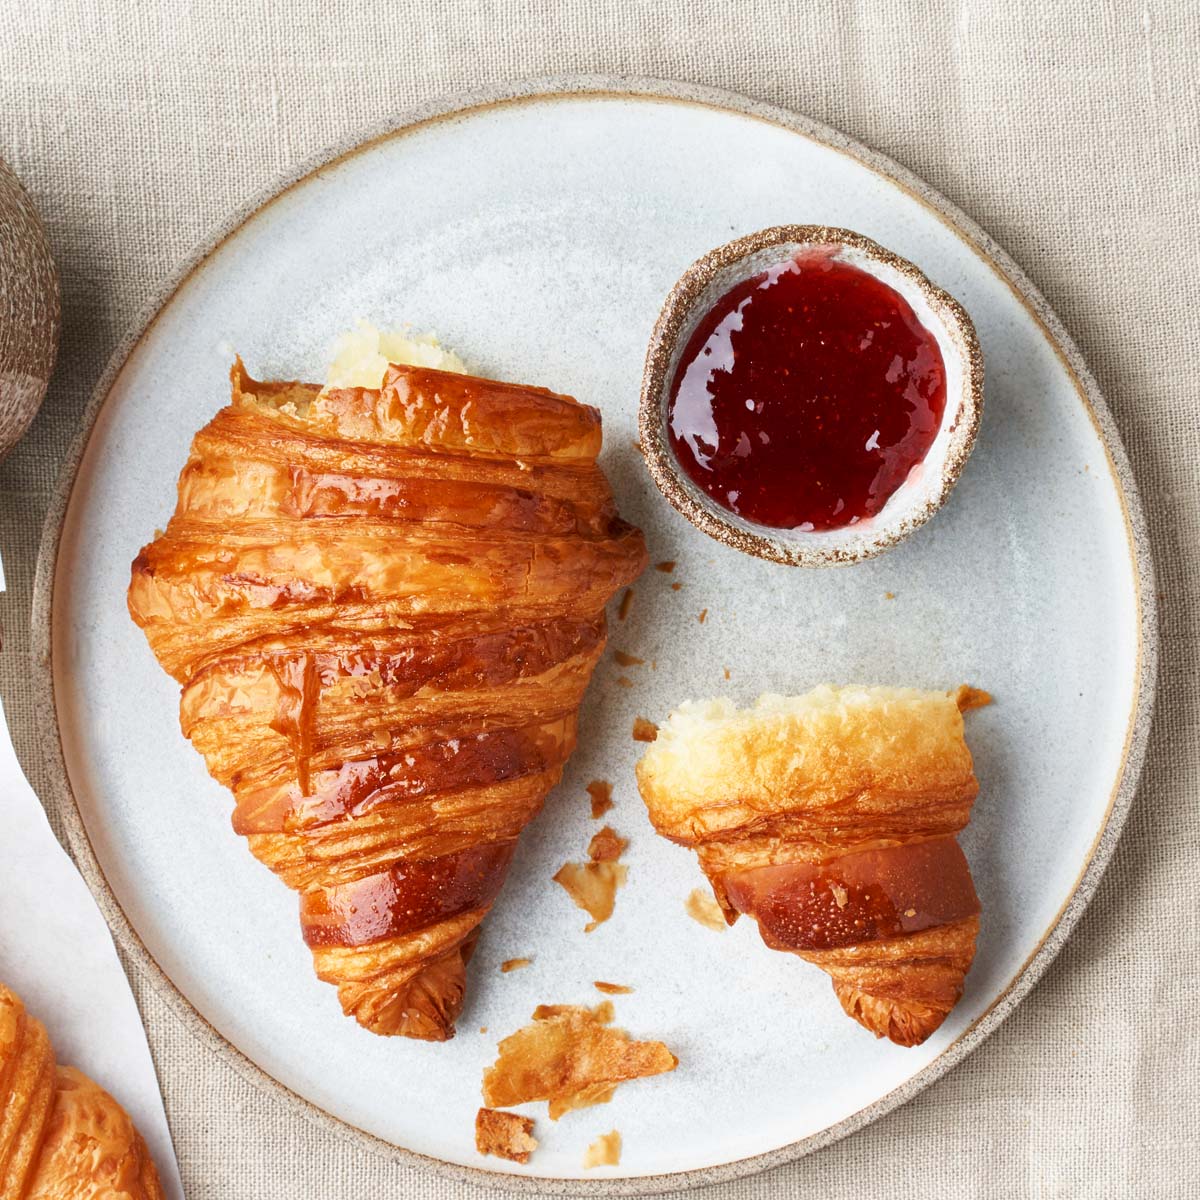 Some people prefer the softer, sweeter crescent rolls dough, while others prefer croissants' flakiness and buttery flavor. Croissants are more time-consuming and labor-intensive than crescent rolls, so they are considered a more special or premium pastry.